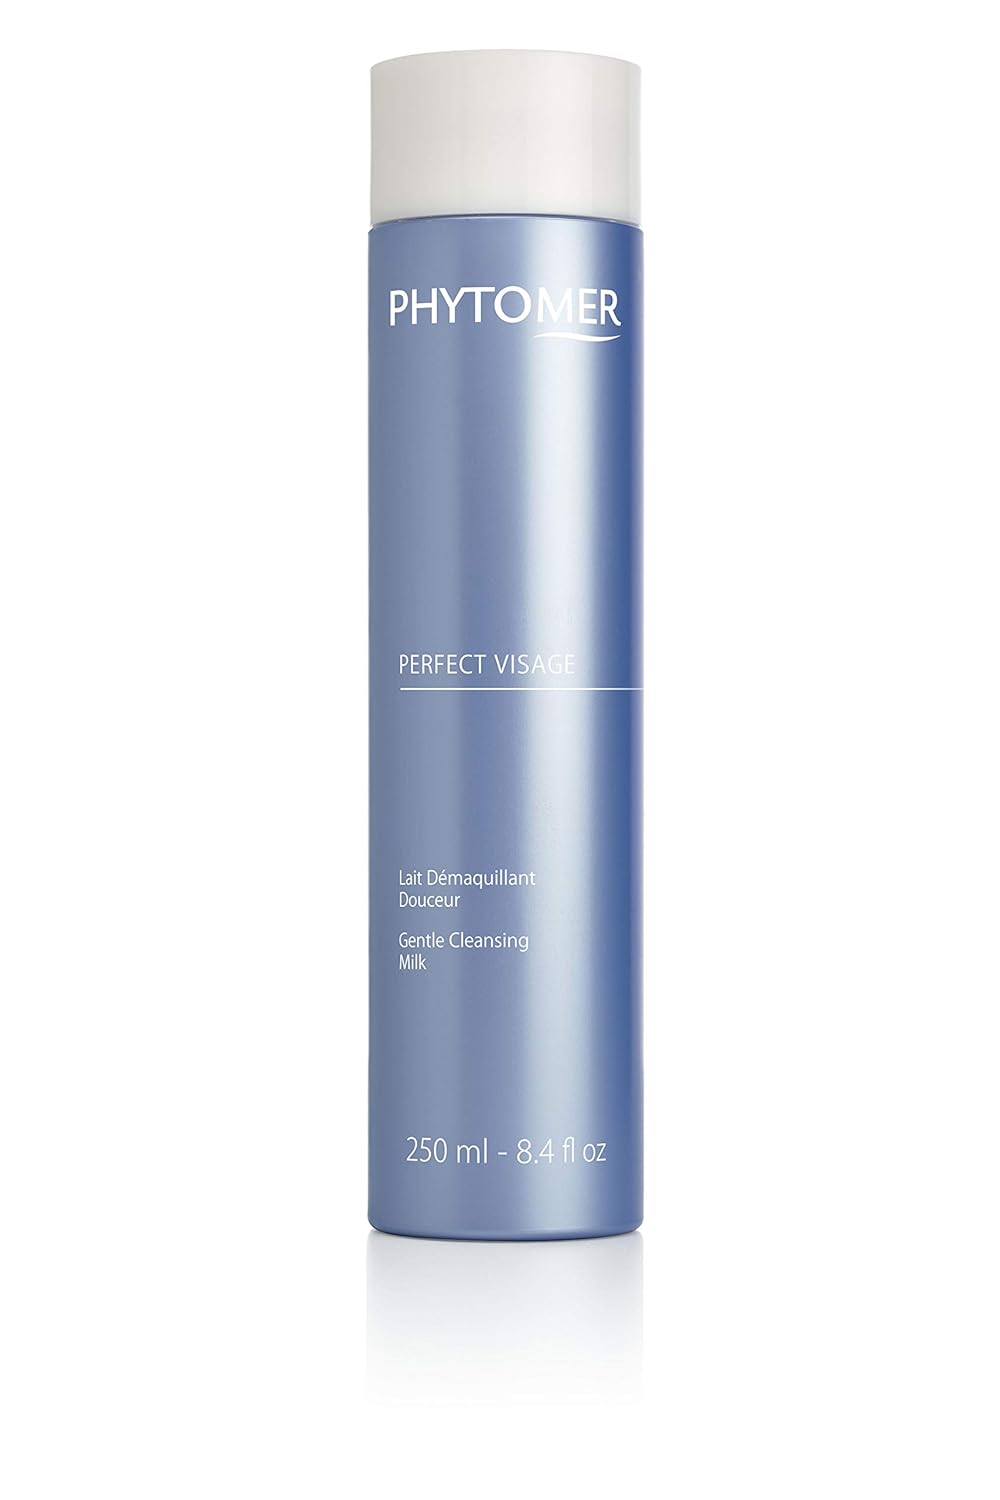 Phytomer-Perfect-Visage-Gentle-Cleansing-489